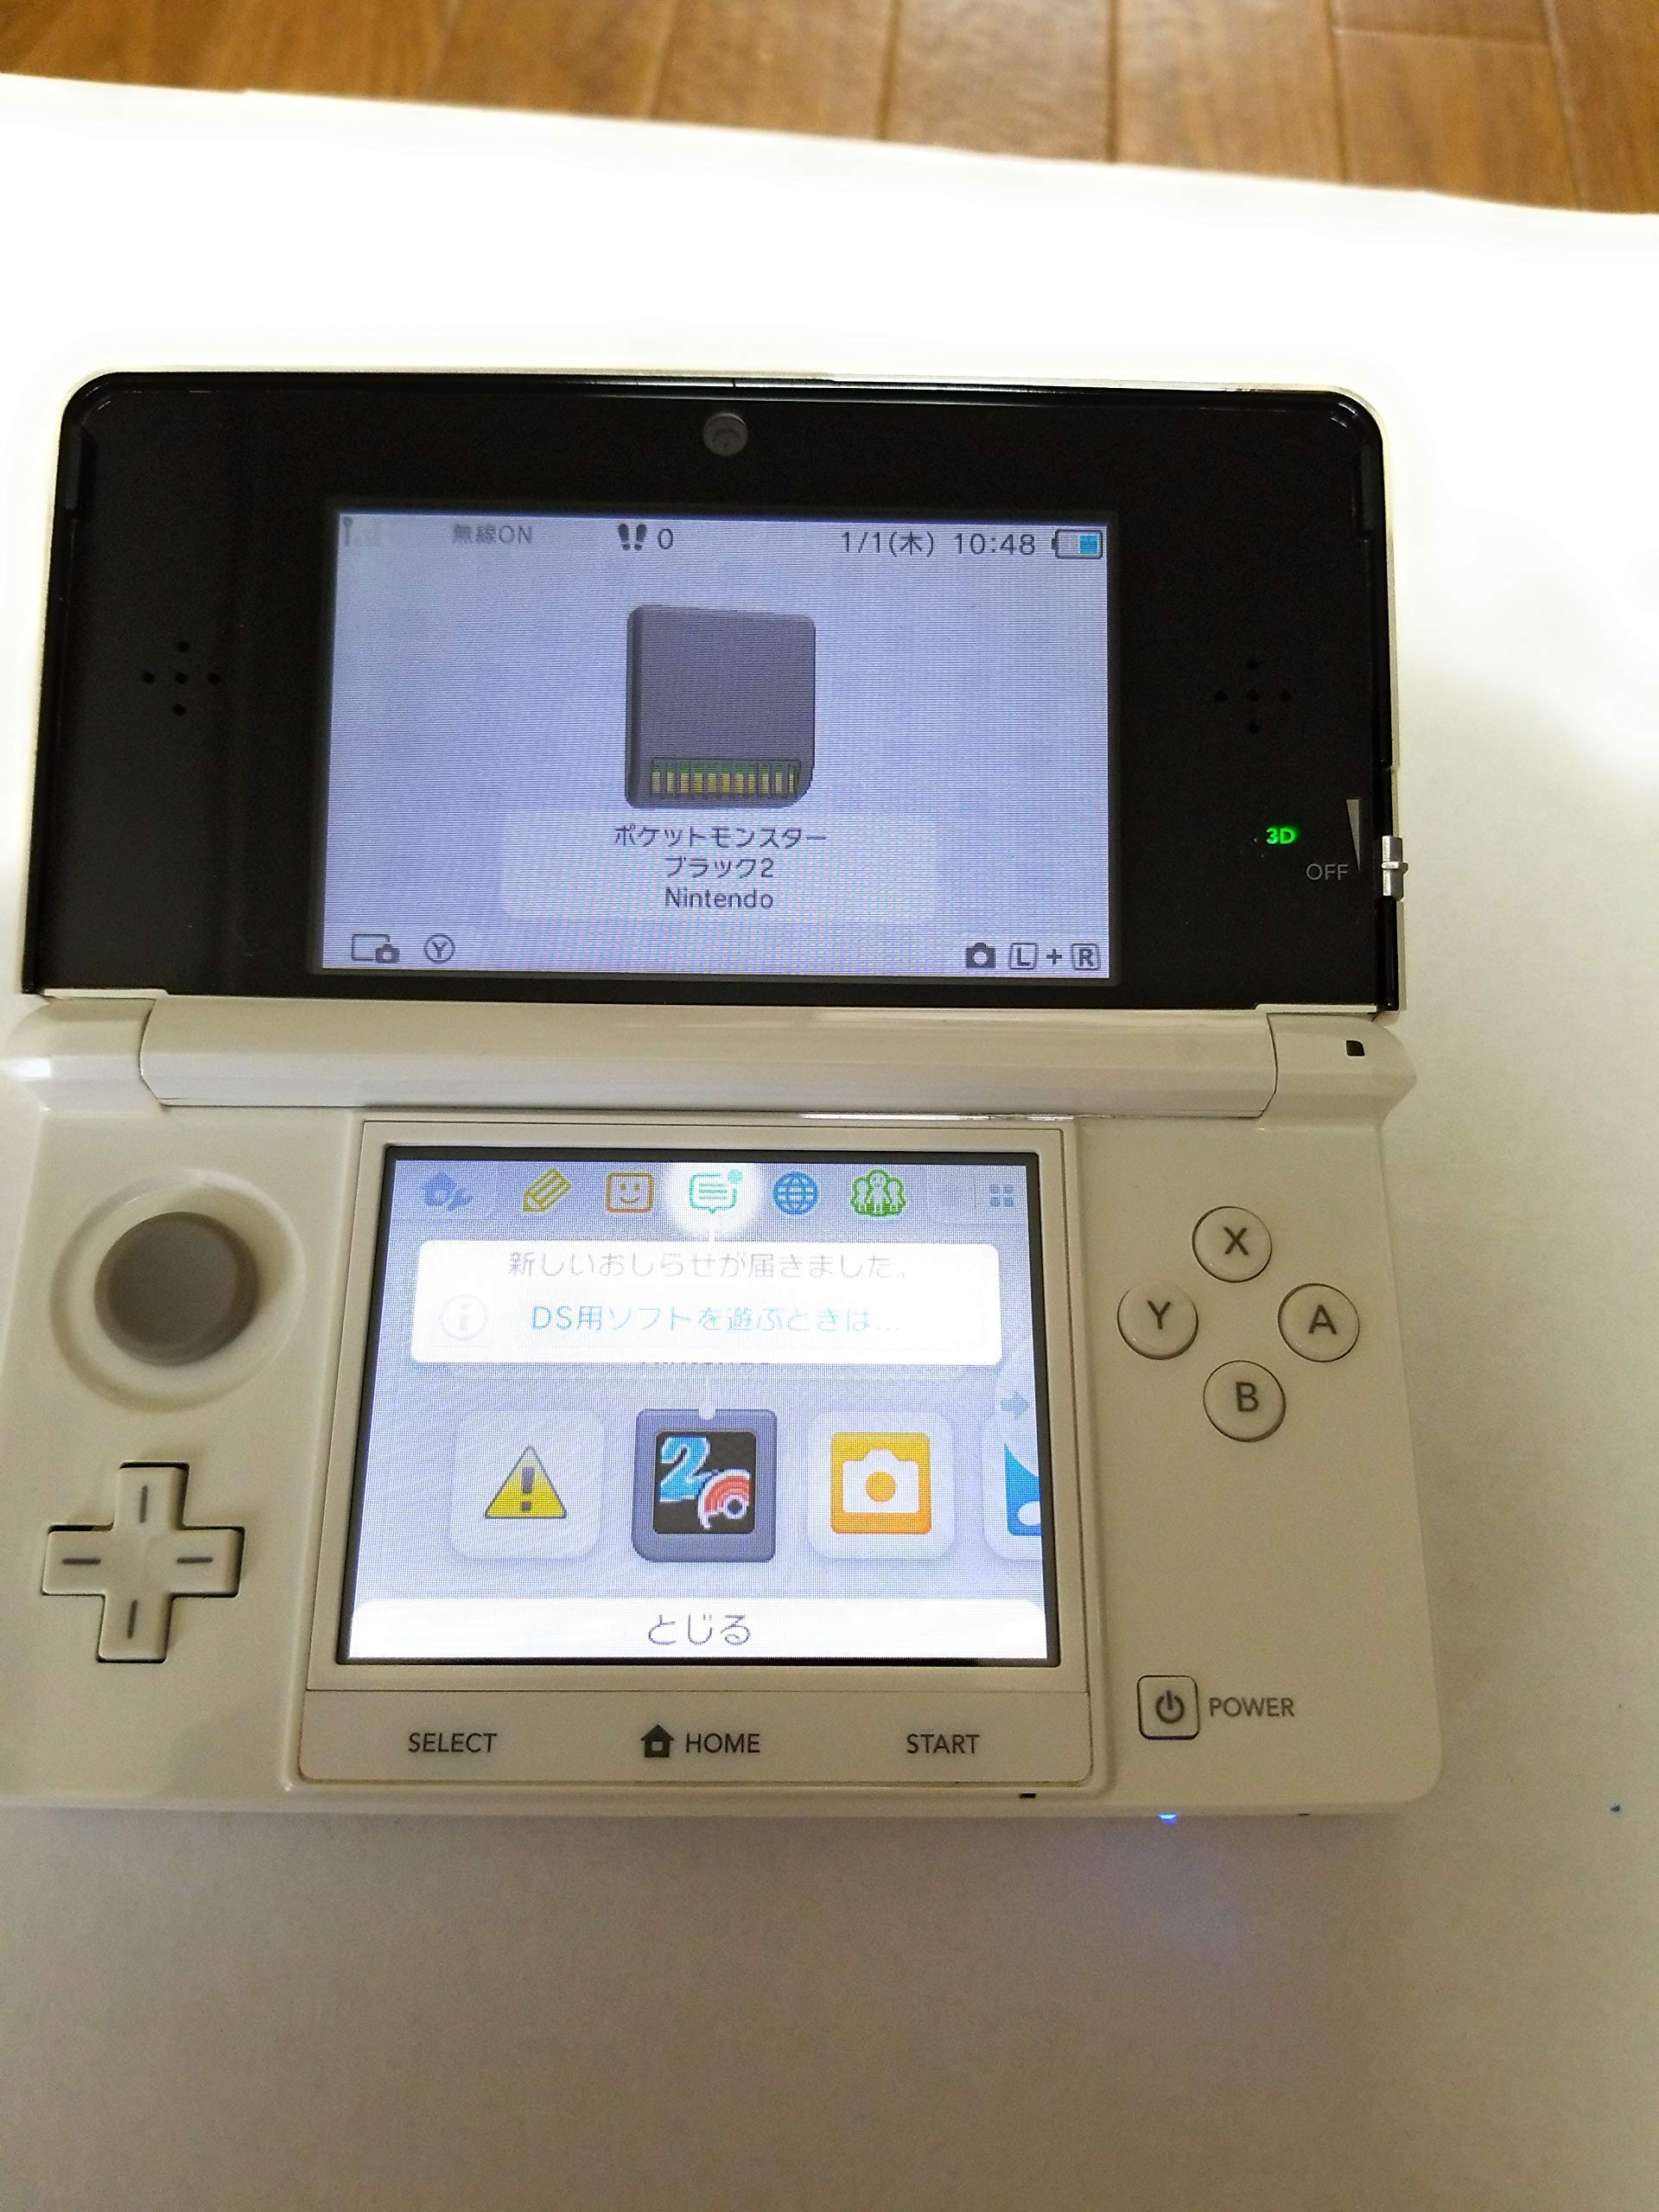 Nintendo 3DS Console - Ice White (Japanese Imported Version - only plays Japanese version games)